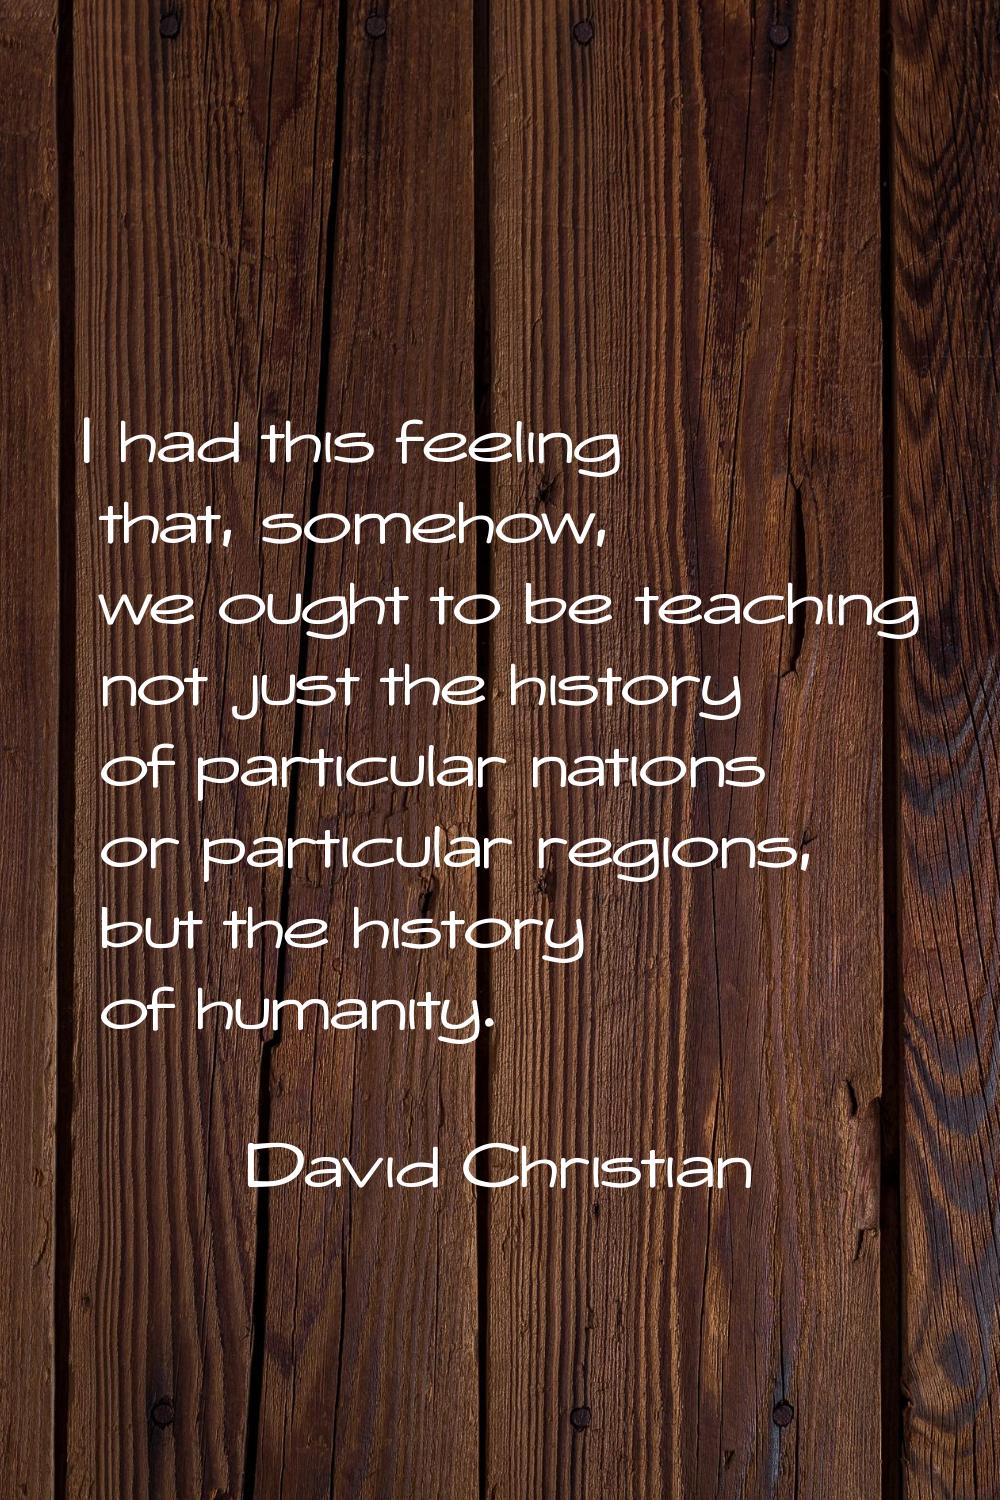 I had this feeling that, somehow, we ought to be teaching not just the history of particular nation